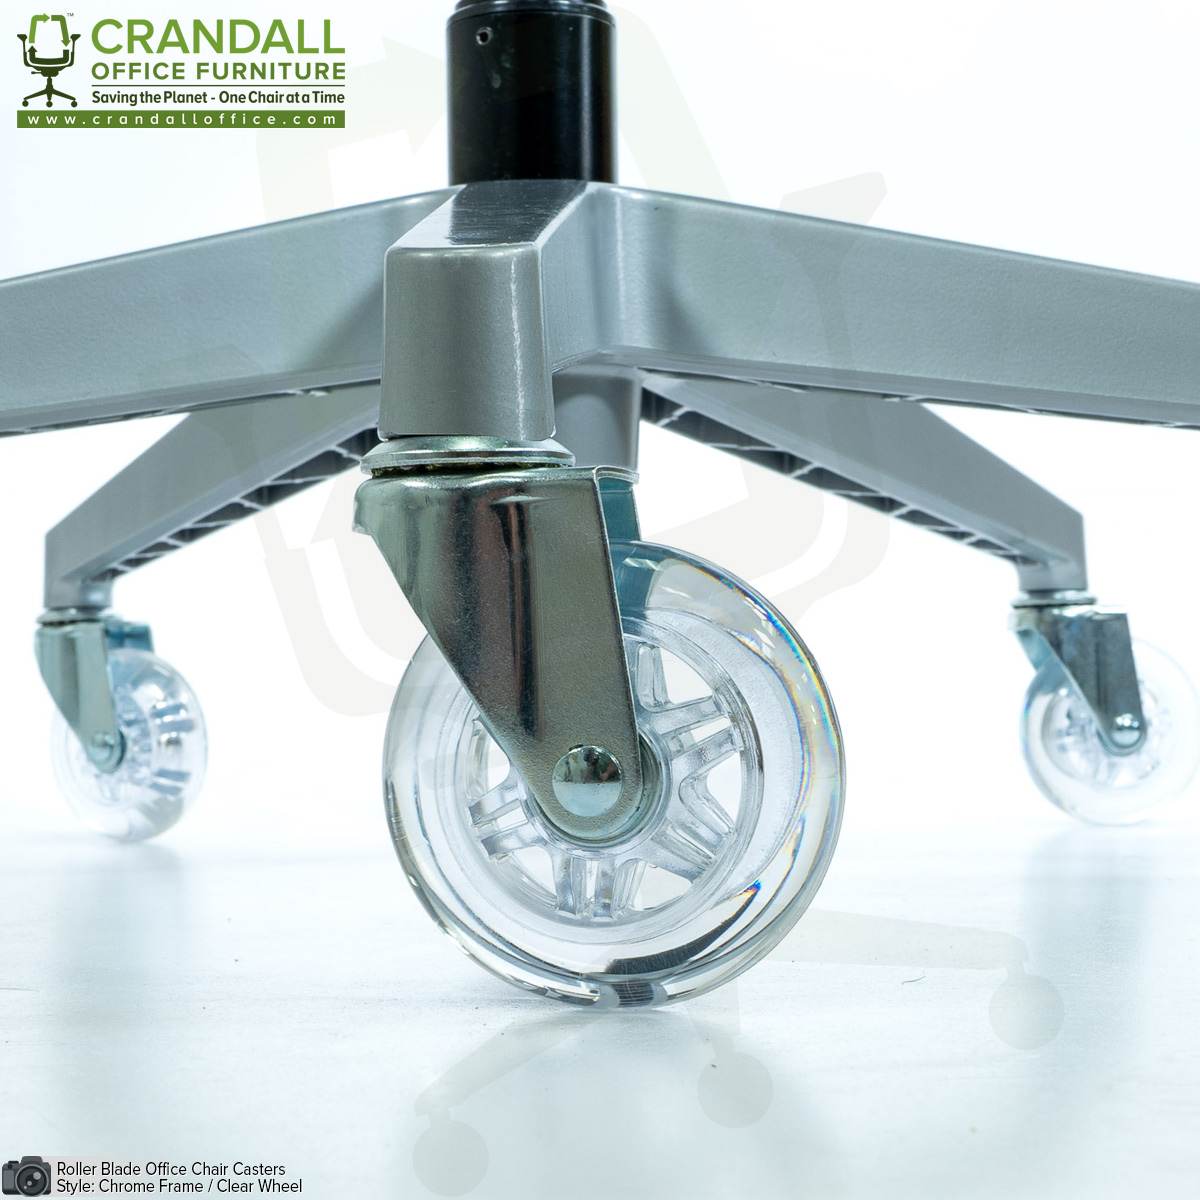 75mm (3 inch) Roller Blade Style Office Chair Casters - Crandall